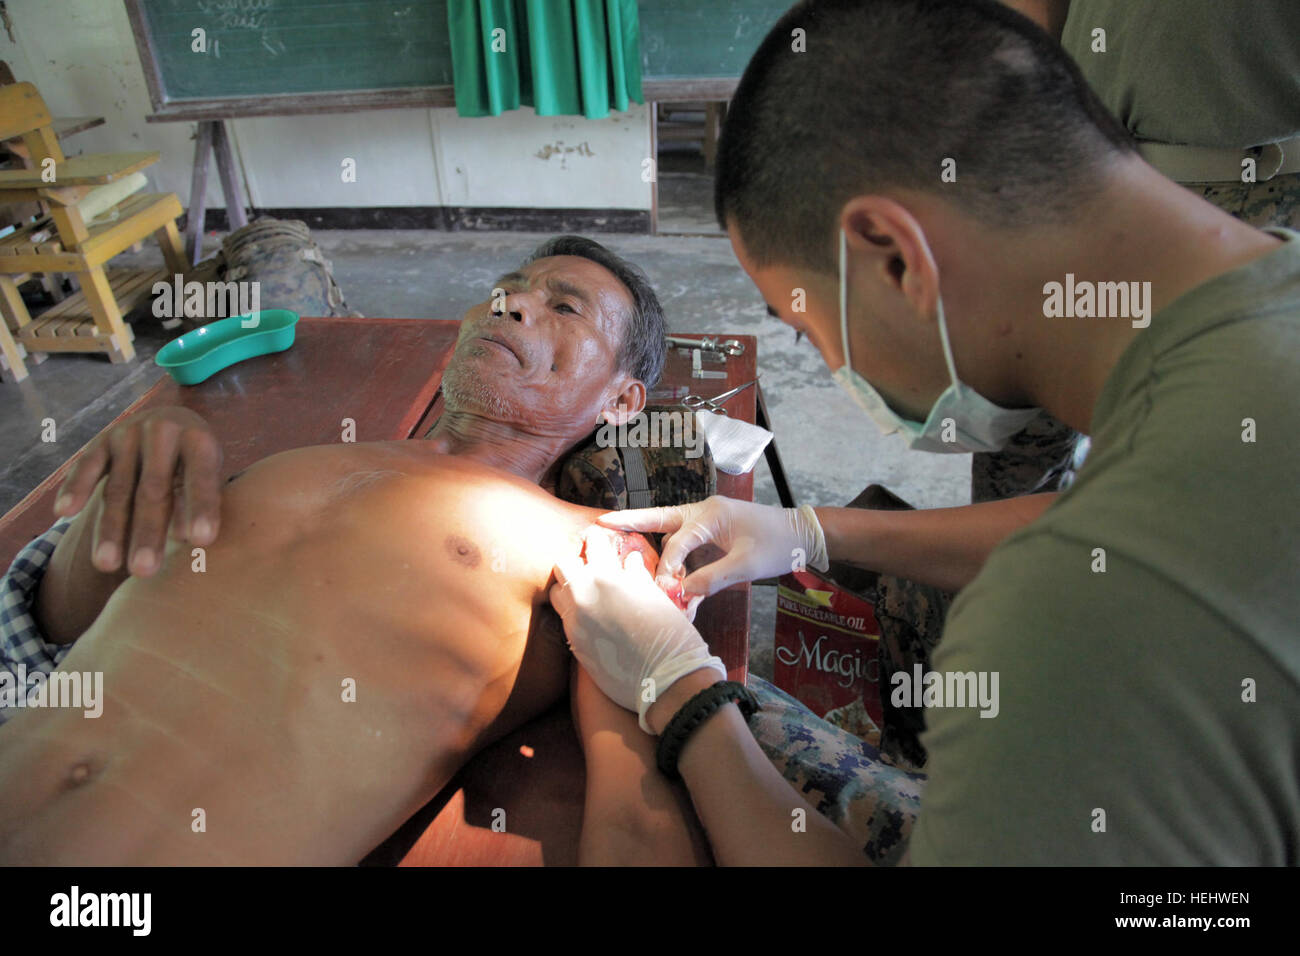 Petty Officer 3rd Class Justin Azucenas, a hospital corpsman assigned to Health Service Support Platoon, Combat Logistics Battalion 31, 31st Marine Expeditionary Unit, stitches the wound of a local man at Umiray Elementary School during a medical civic action project supporting Balikatan 2009. Civil military humanitarian assistance activities enable Armed Forces of the Philippines and U.S. personnel to get to know each other, train together, and provide assistance in communities where the need is greatest, improving their ability to operate as one team on joint projects. Balikatan 2009 167373 Stock Photo